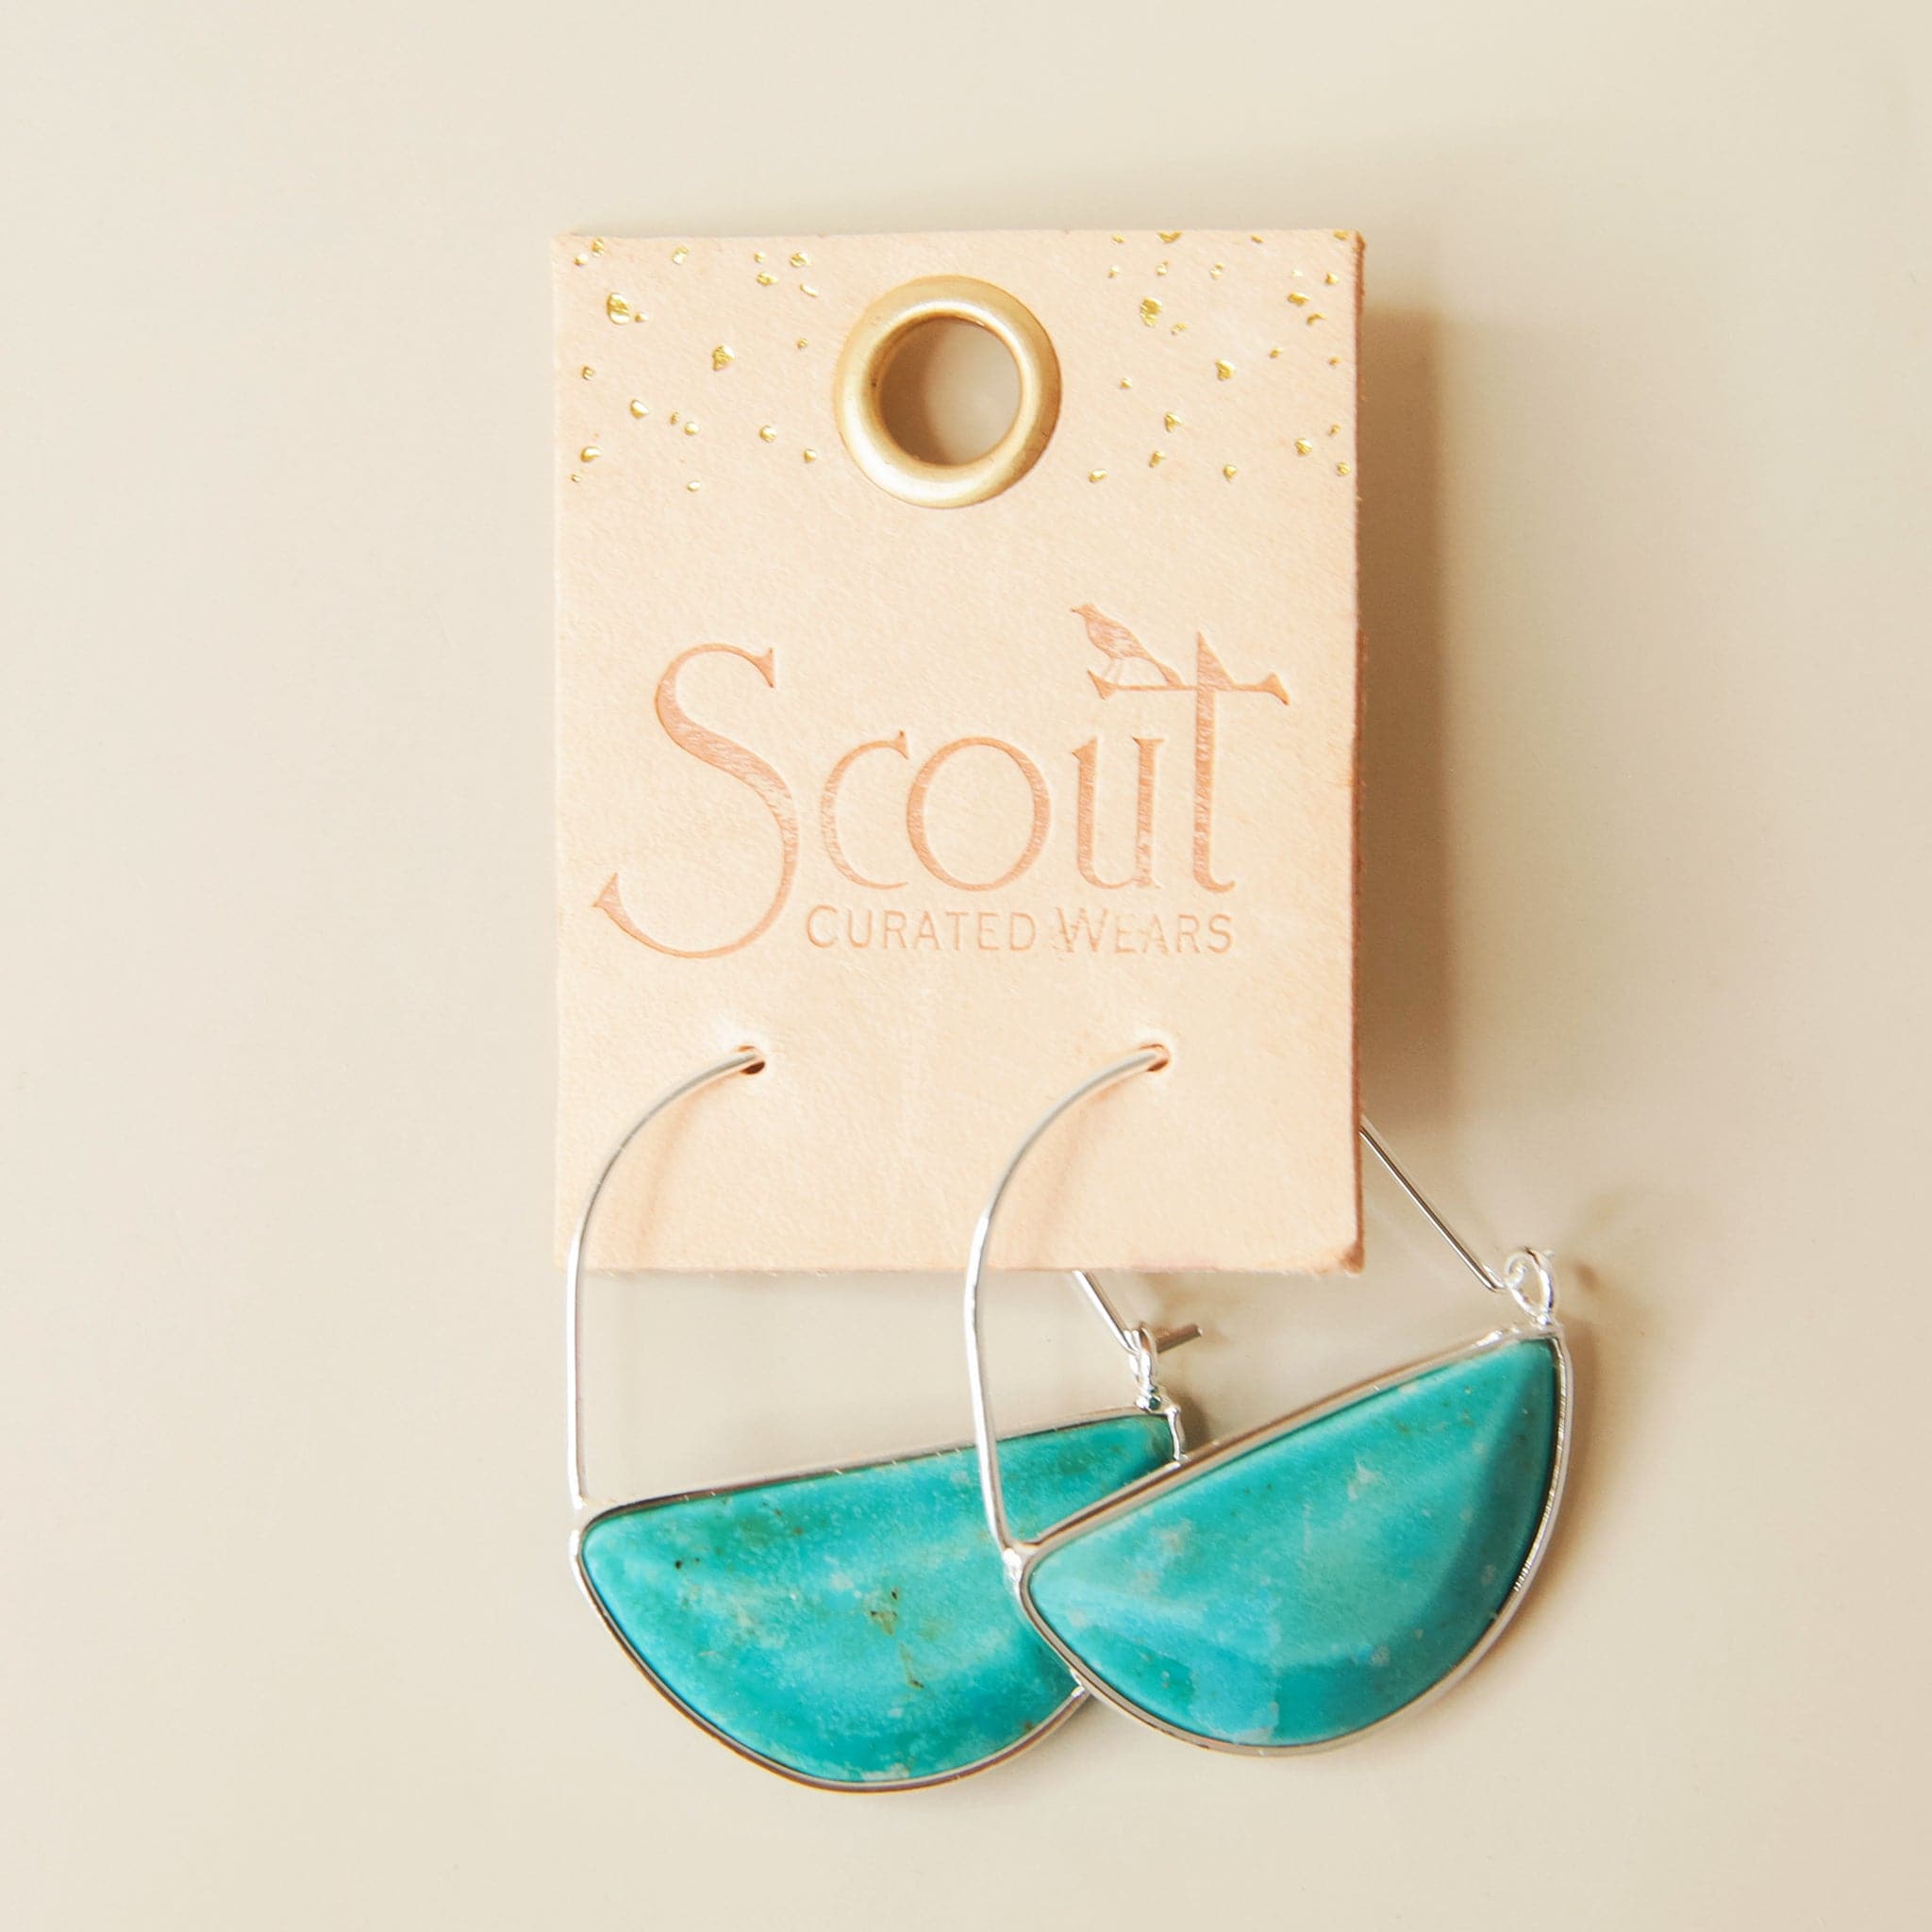 In front of a cream background is a pair of silver hoops. The bottom half of the hoop is a turquoise stone. The hoops are on a peach leather tag. Etched into the tag is text that reads ‘Scout curated wears.&#39;